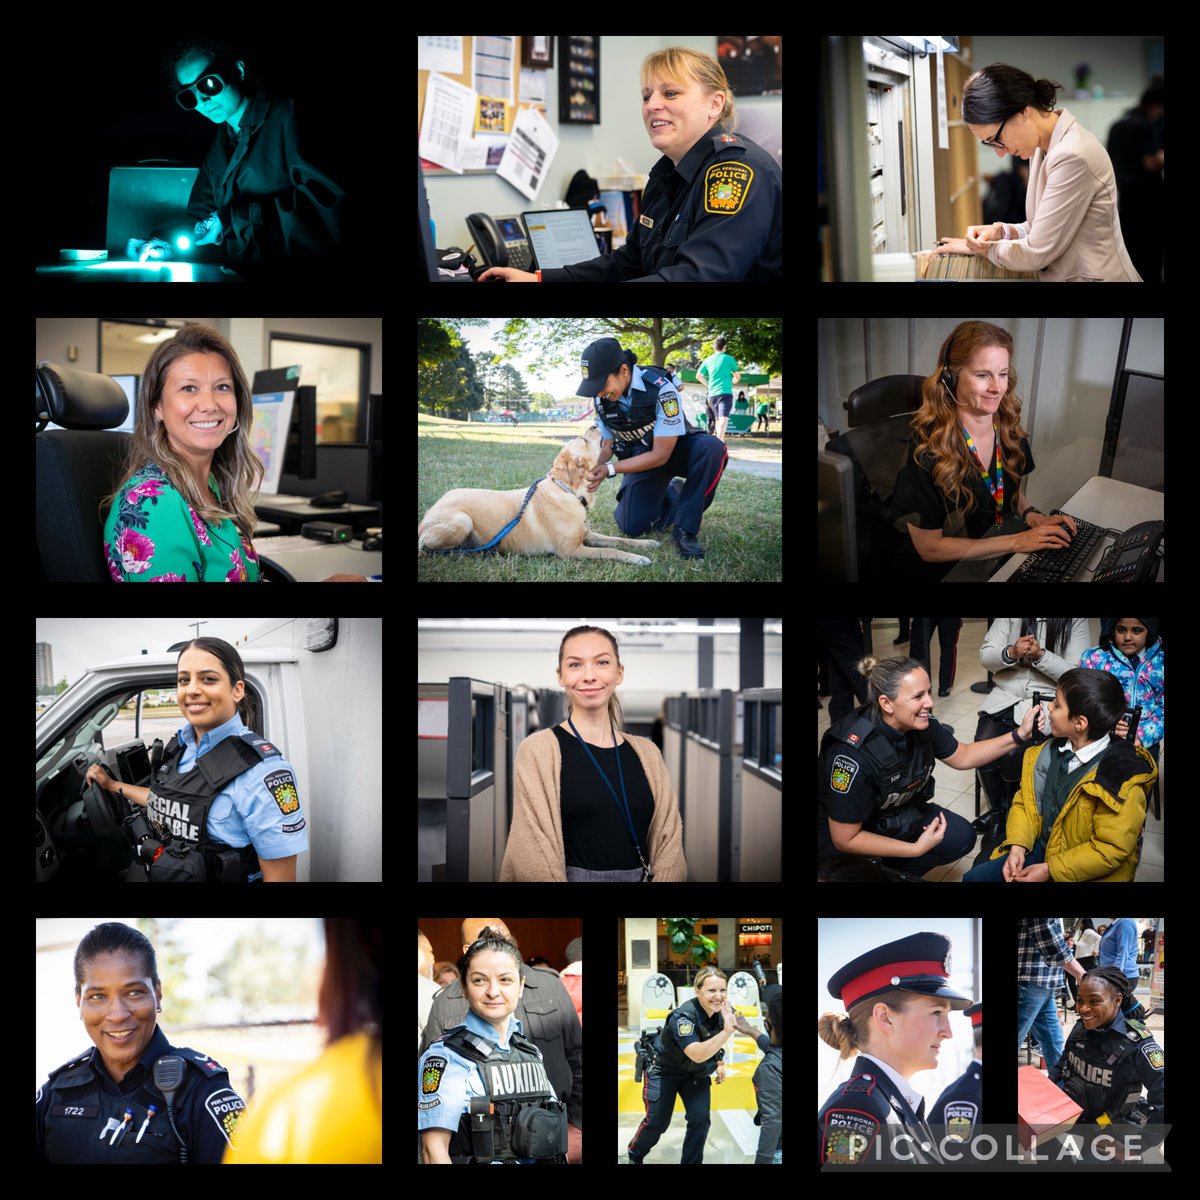 We are dedicated to creating an inclusive workplace where we #EmbraceEquity, recognizing the incredible contributions of women @PeelPolice & in our community. We celebrate their positive impact & commit to taking action that brings positive change for women everywhere. #IWD2023